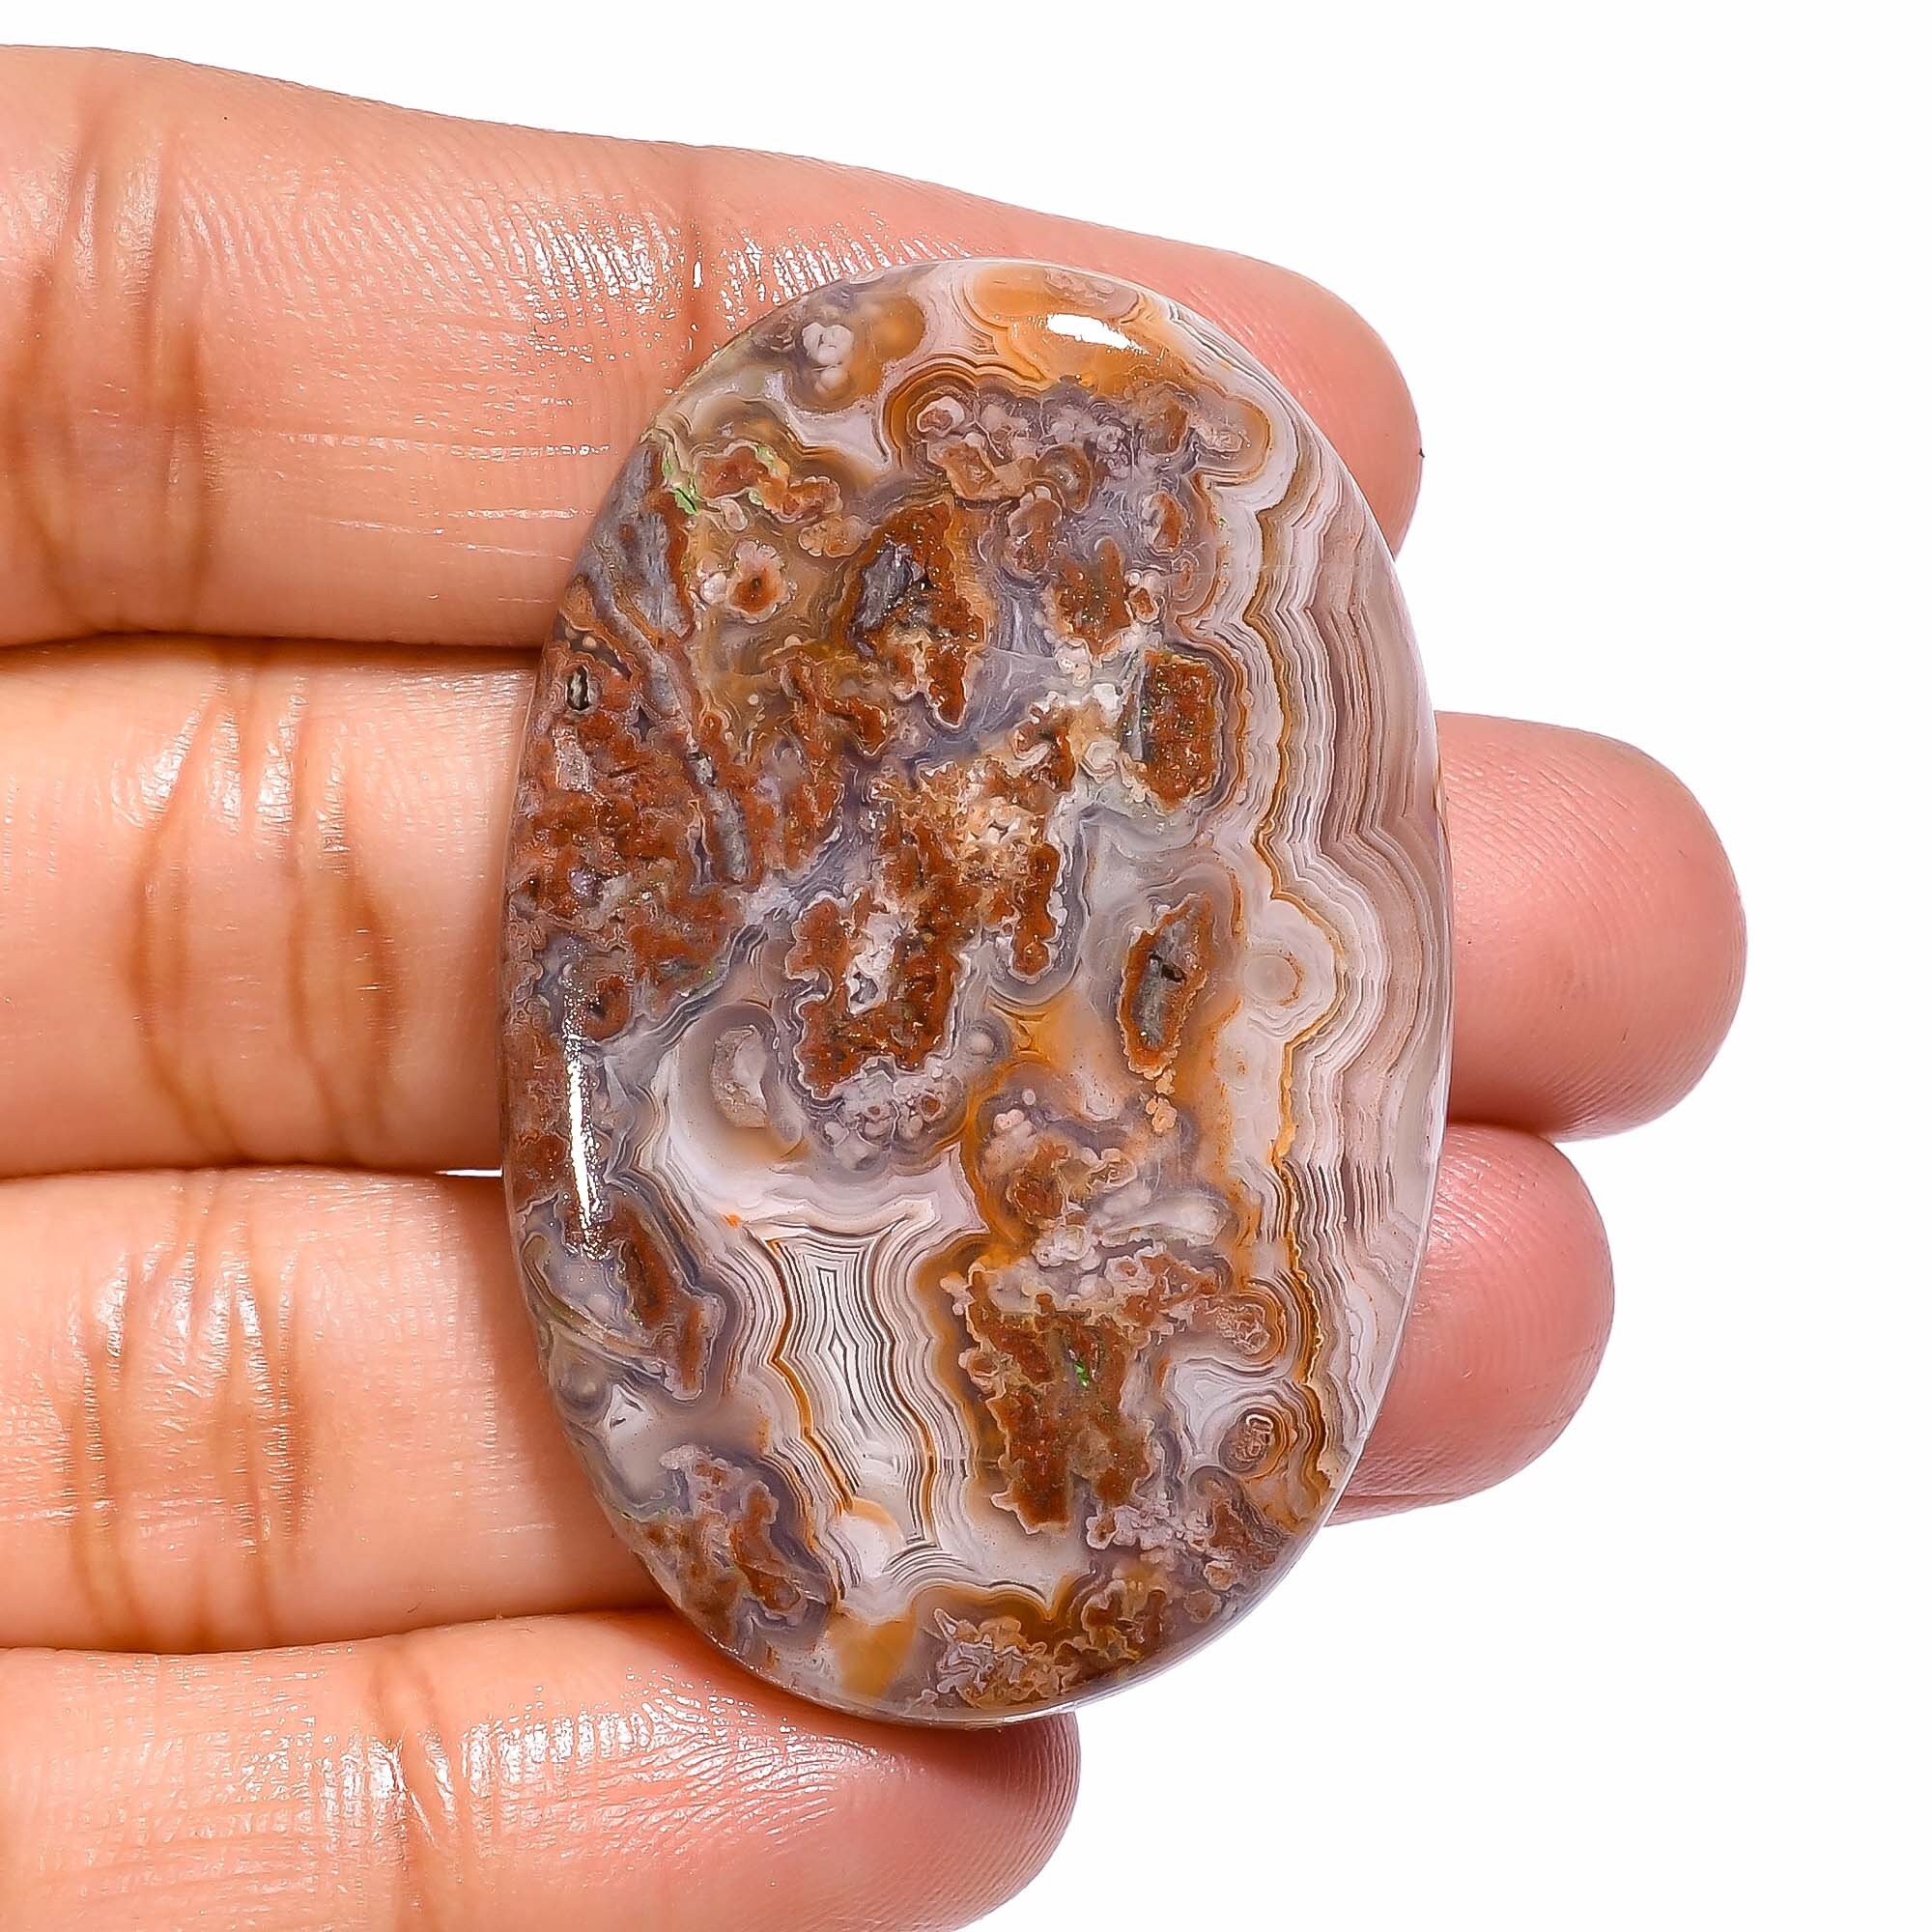 35X21X6 mm HK-2337 Unique Top Grade Quality 100% Natural Crazy Lace Agate Oval Shape Cabochon Loose Gemstone For Making Jewelry 39 Ct